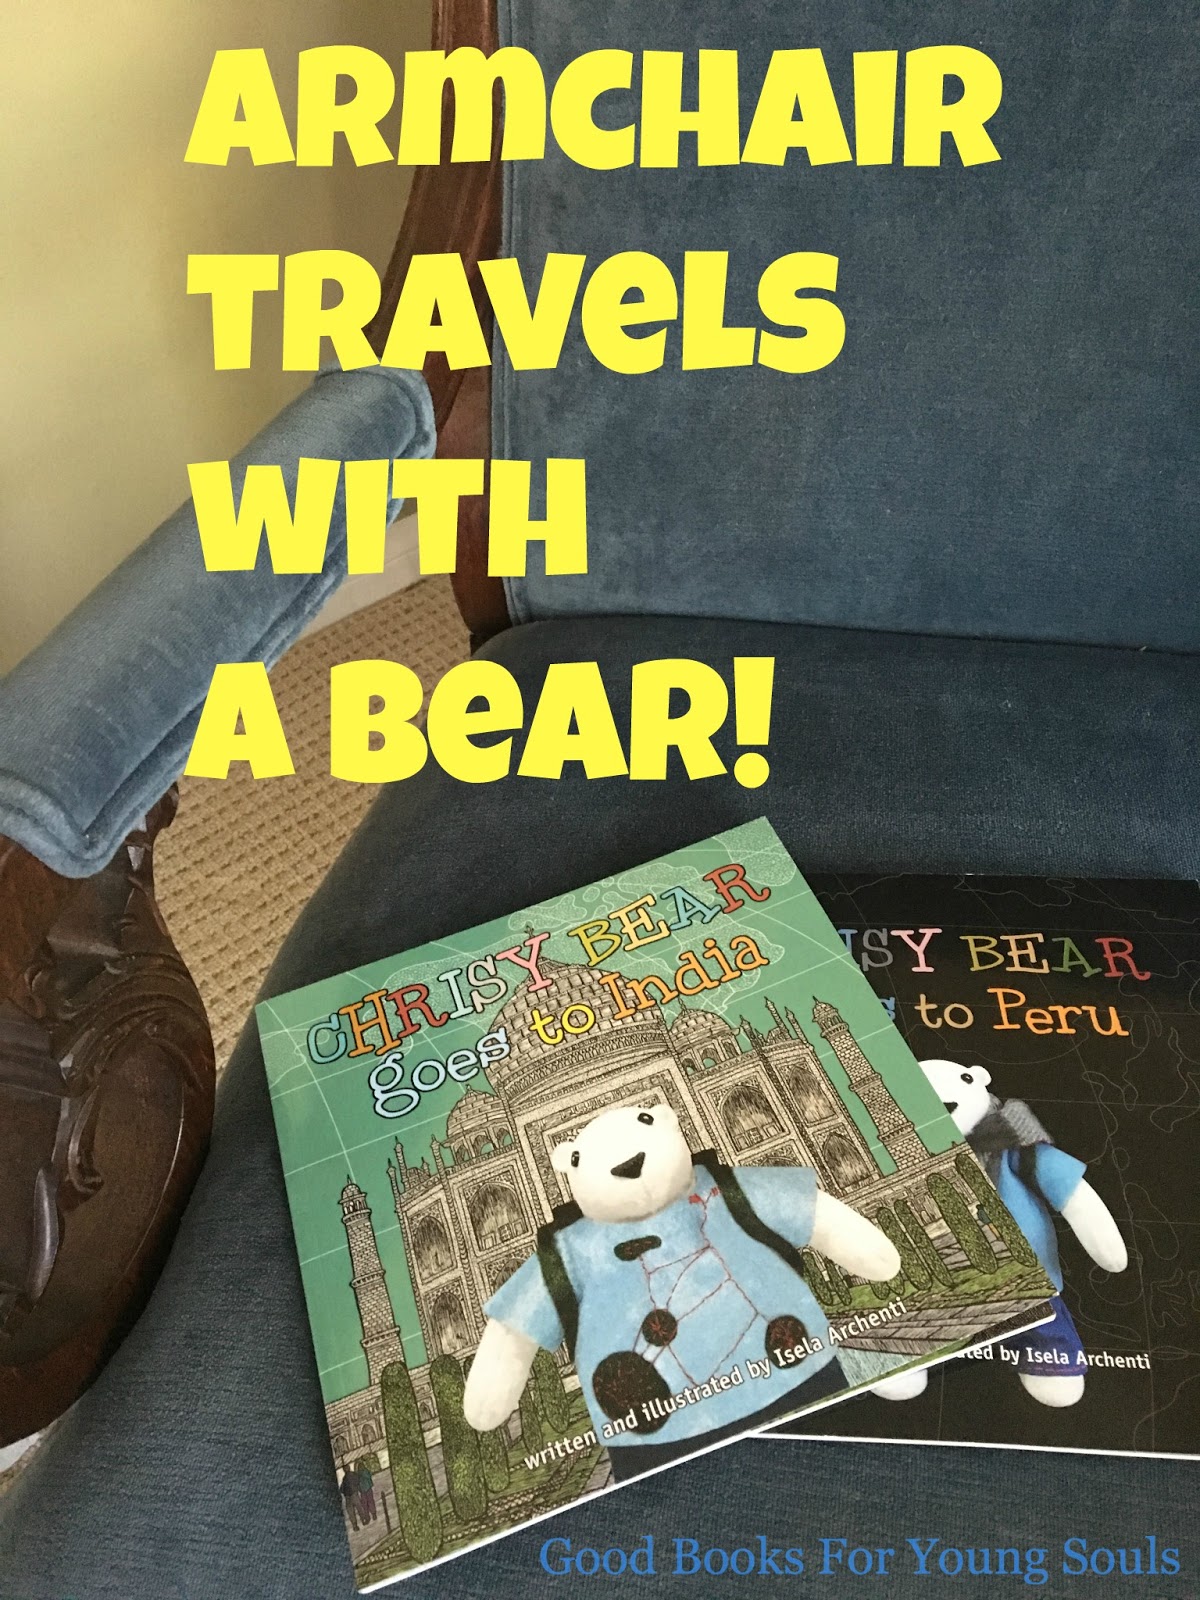 Good Books For Young Souls: Armchair Travels with a Bear